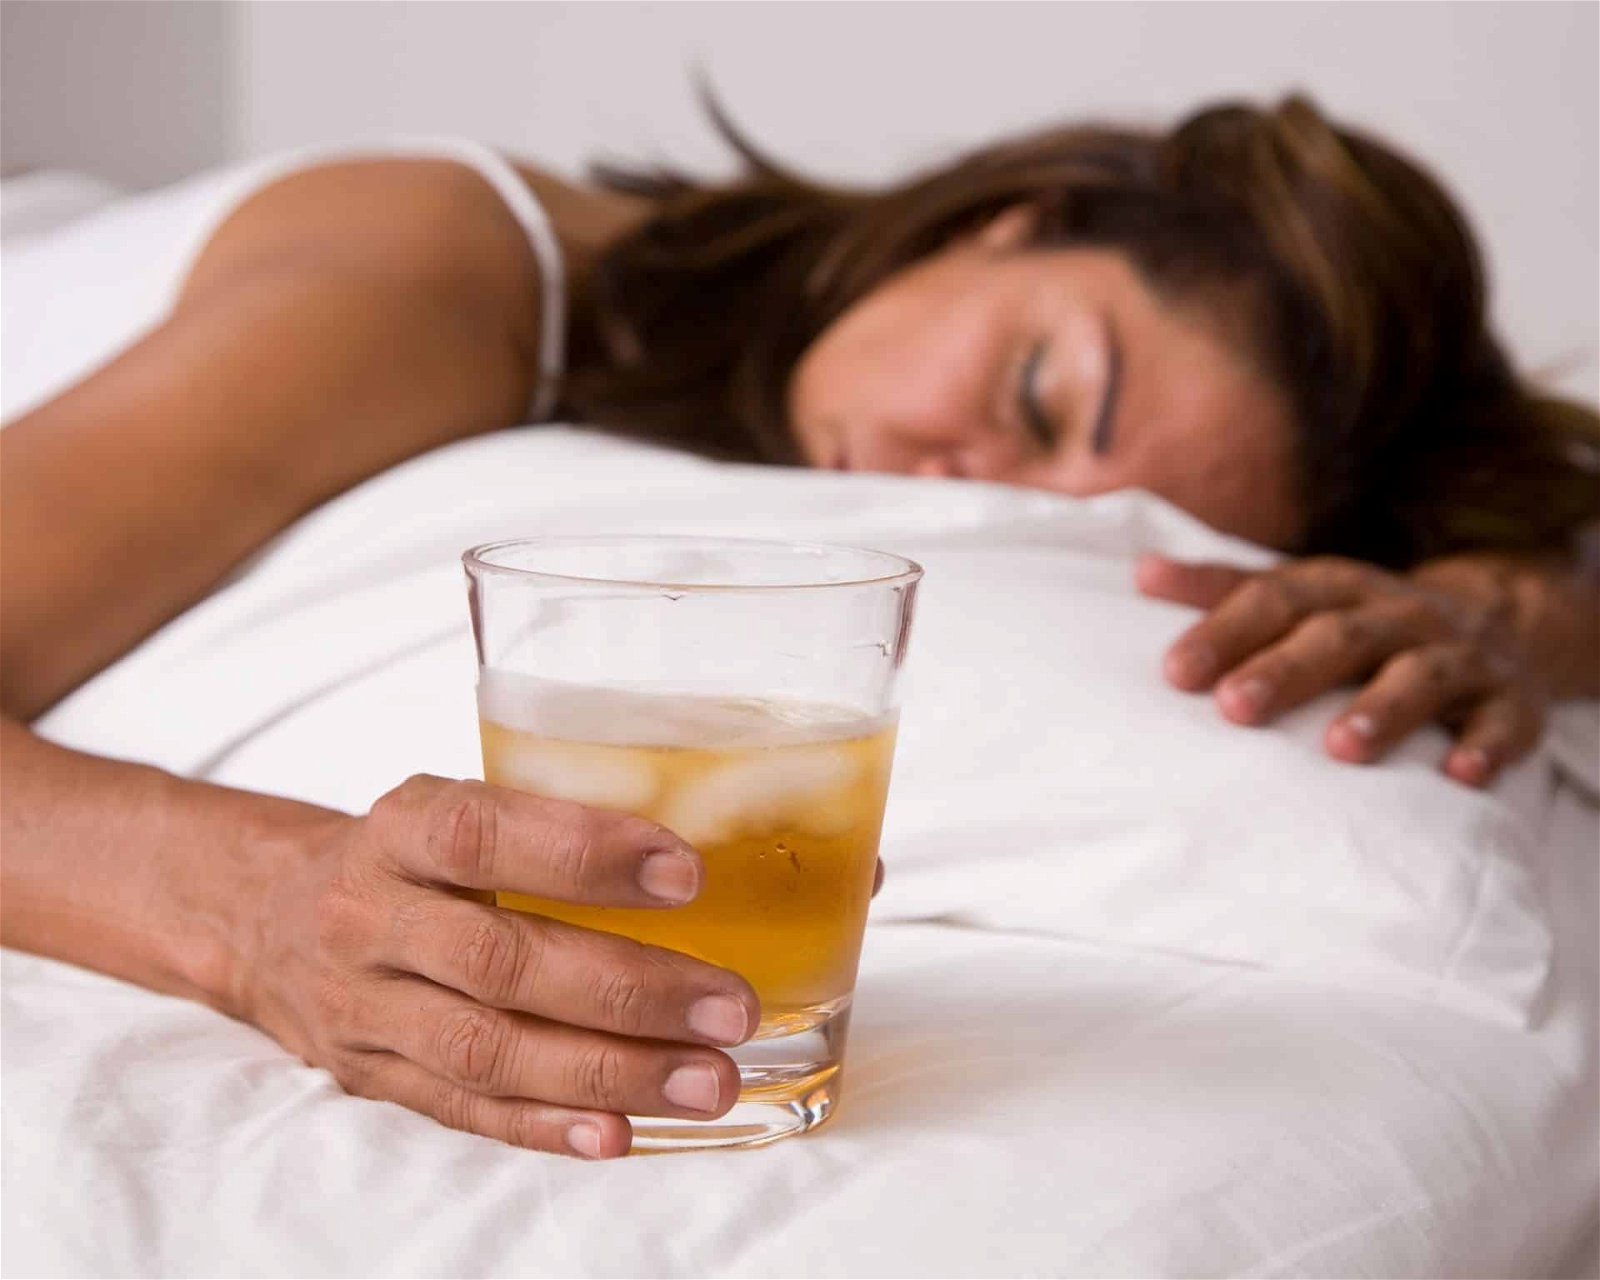 can medication alone be used to treat alcoholism